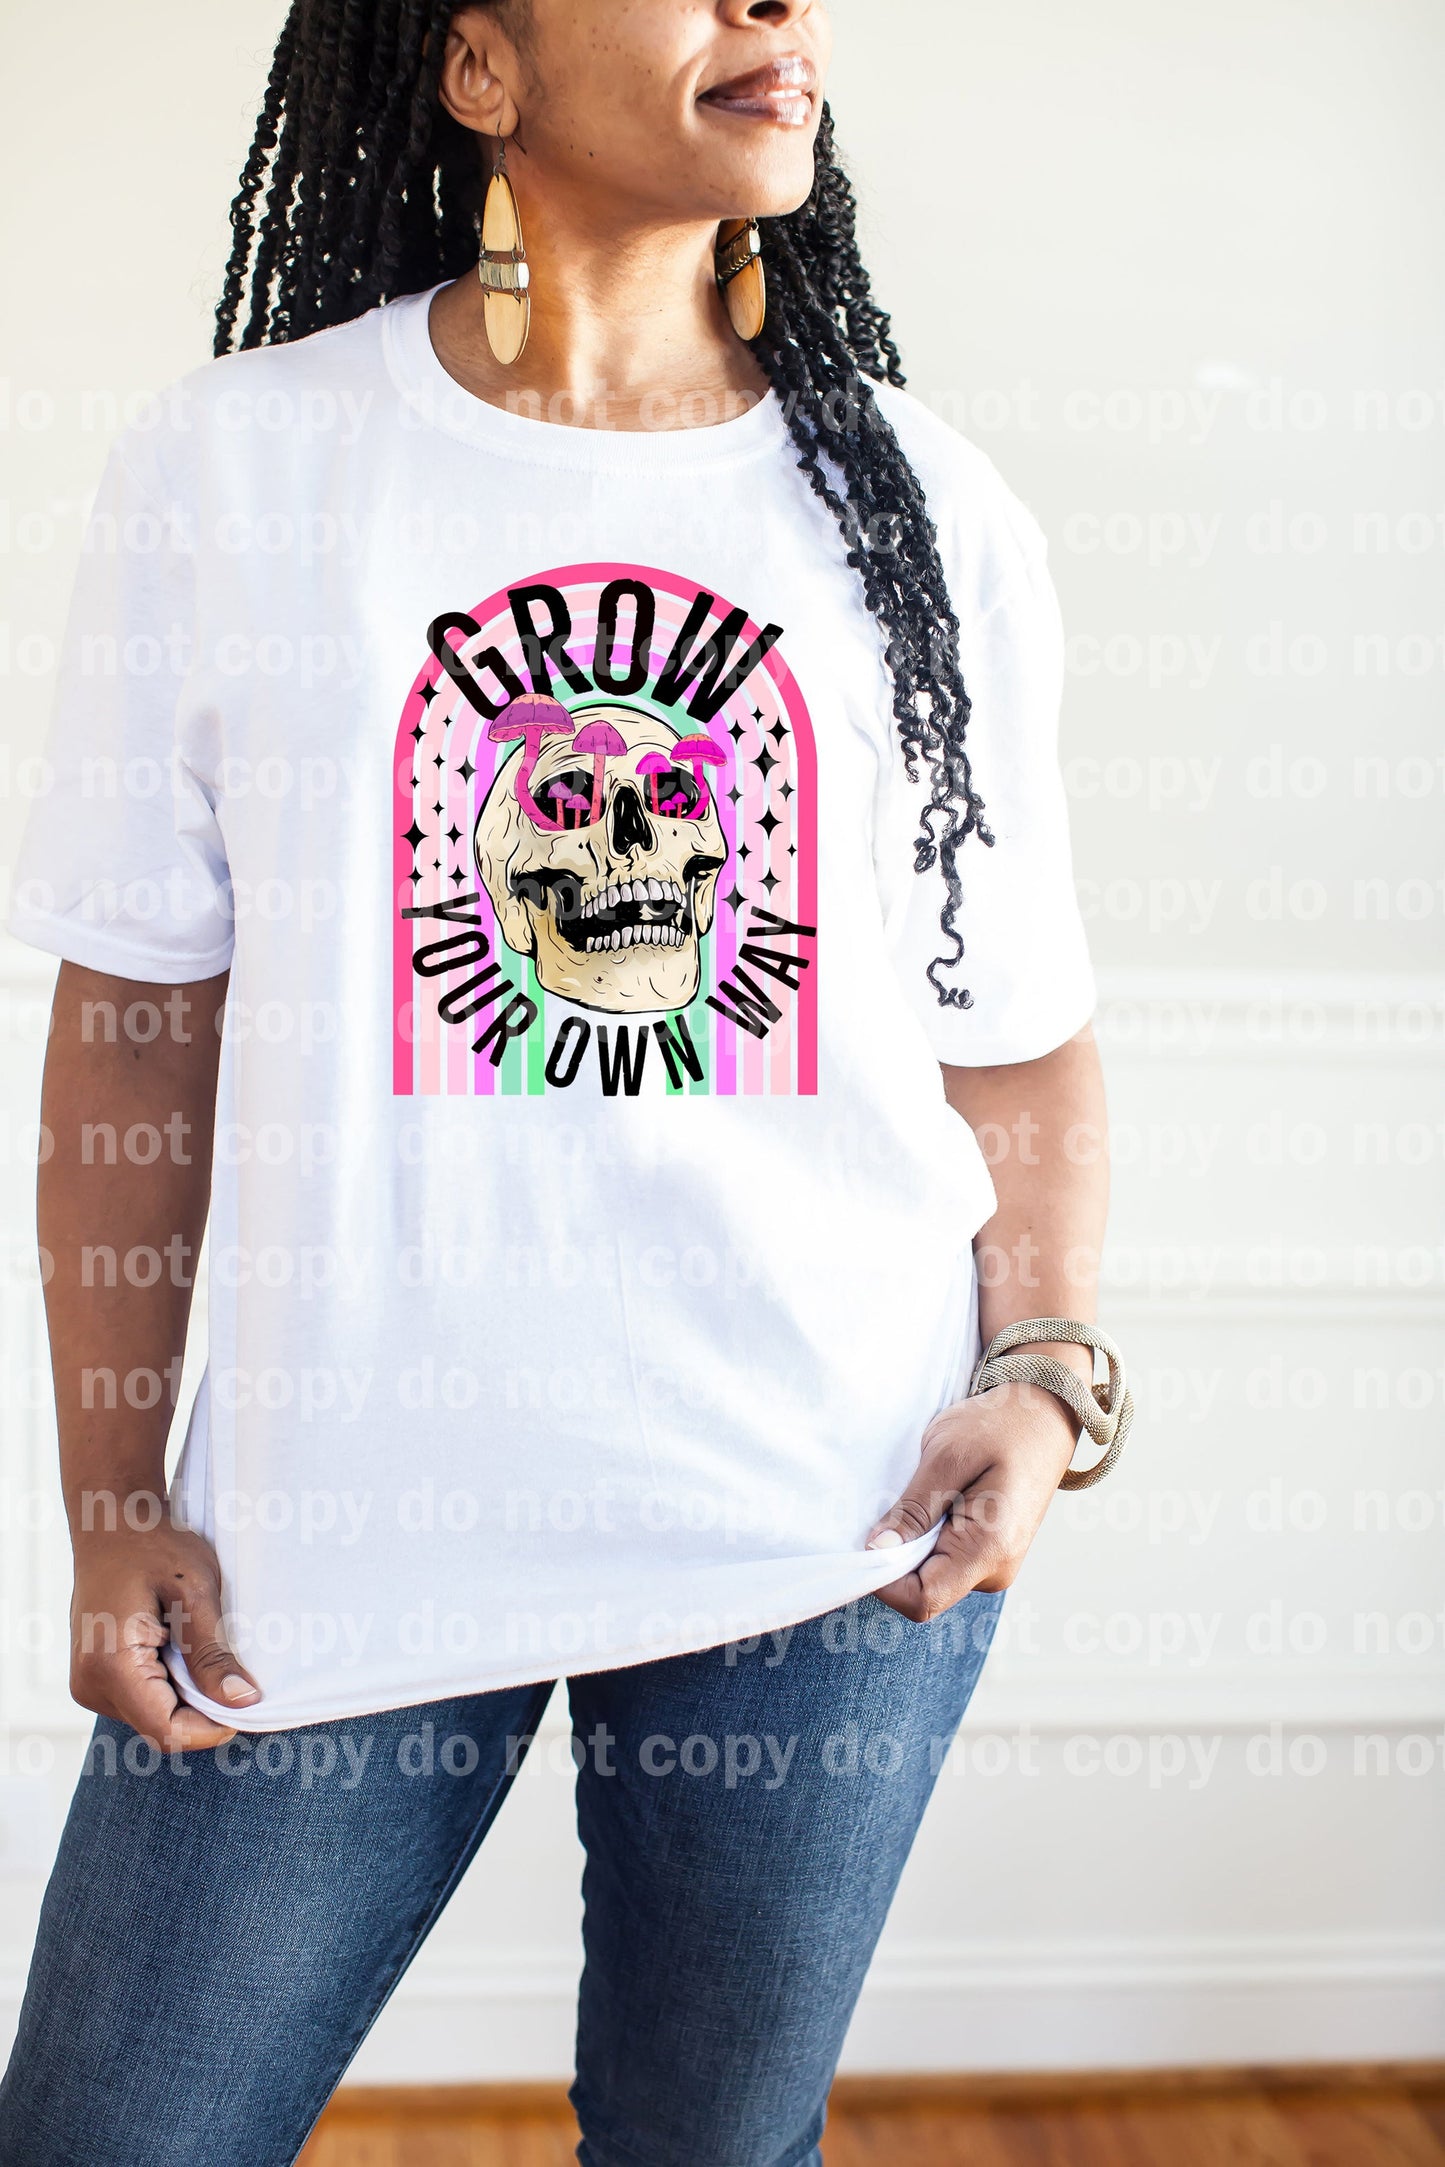 Grow Your Own Way Dream Print or Sublimation Print